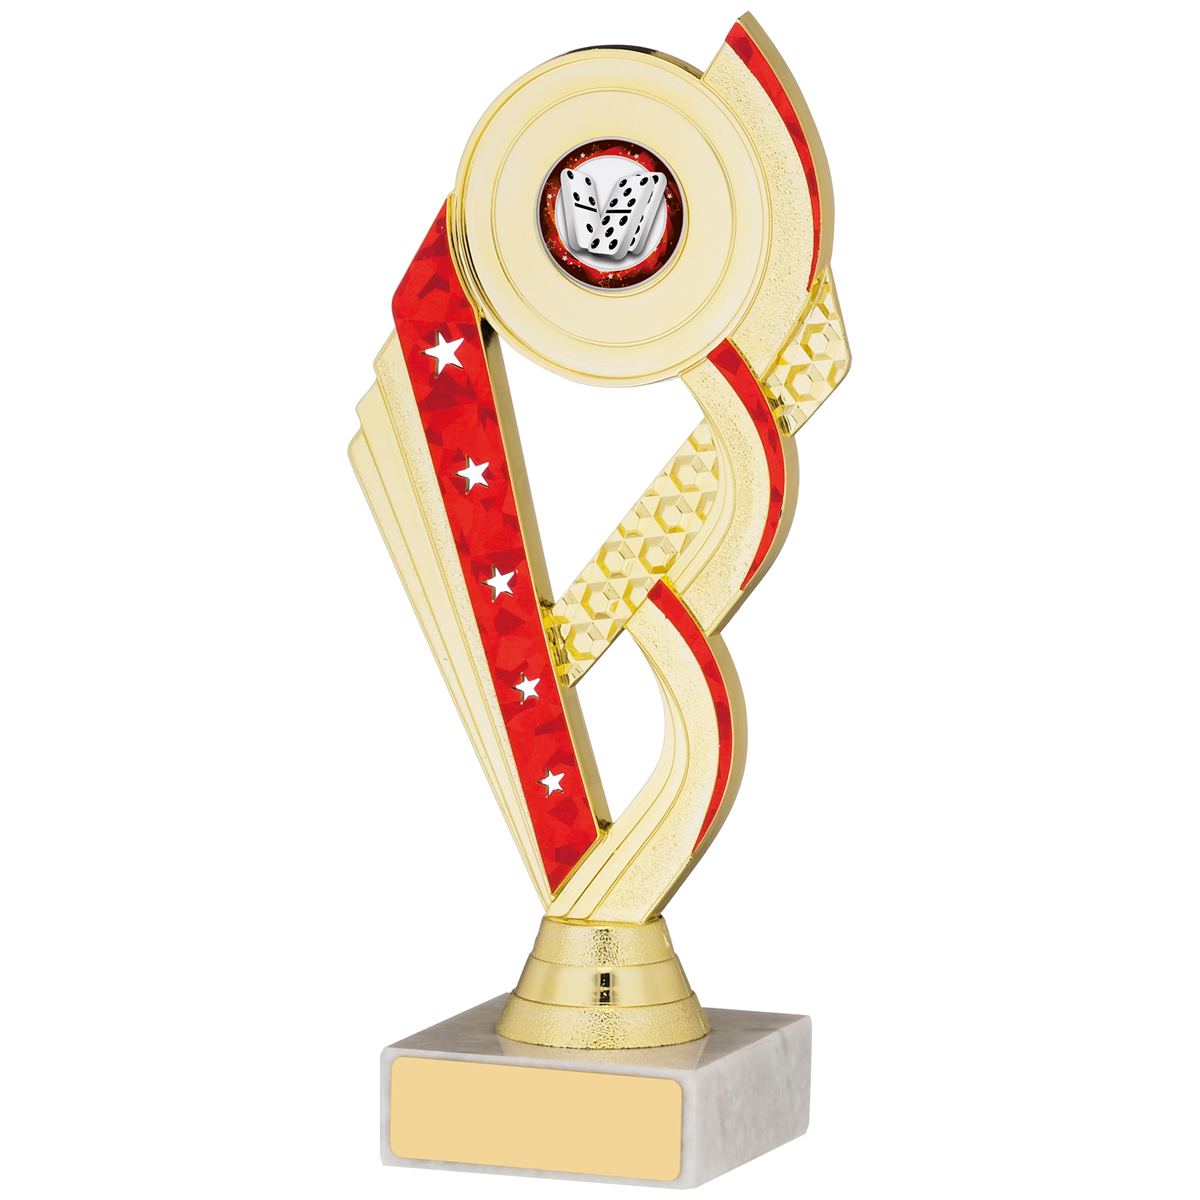 Multi Award Gold and Red Trophy